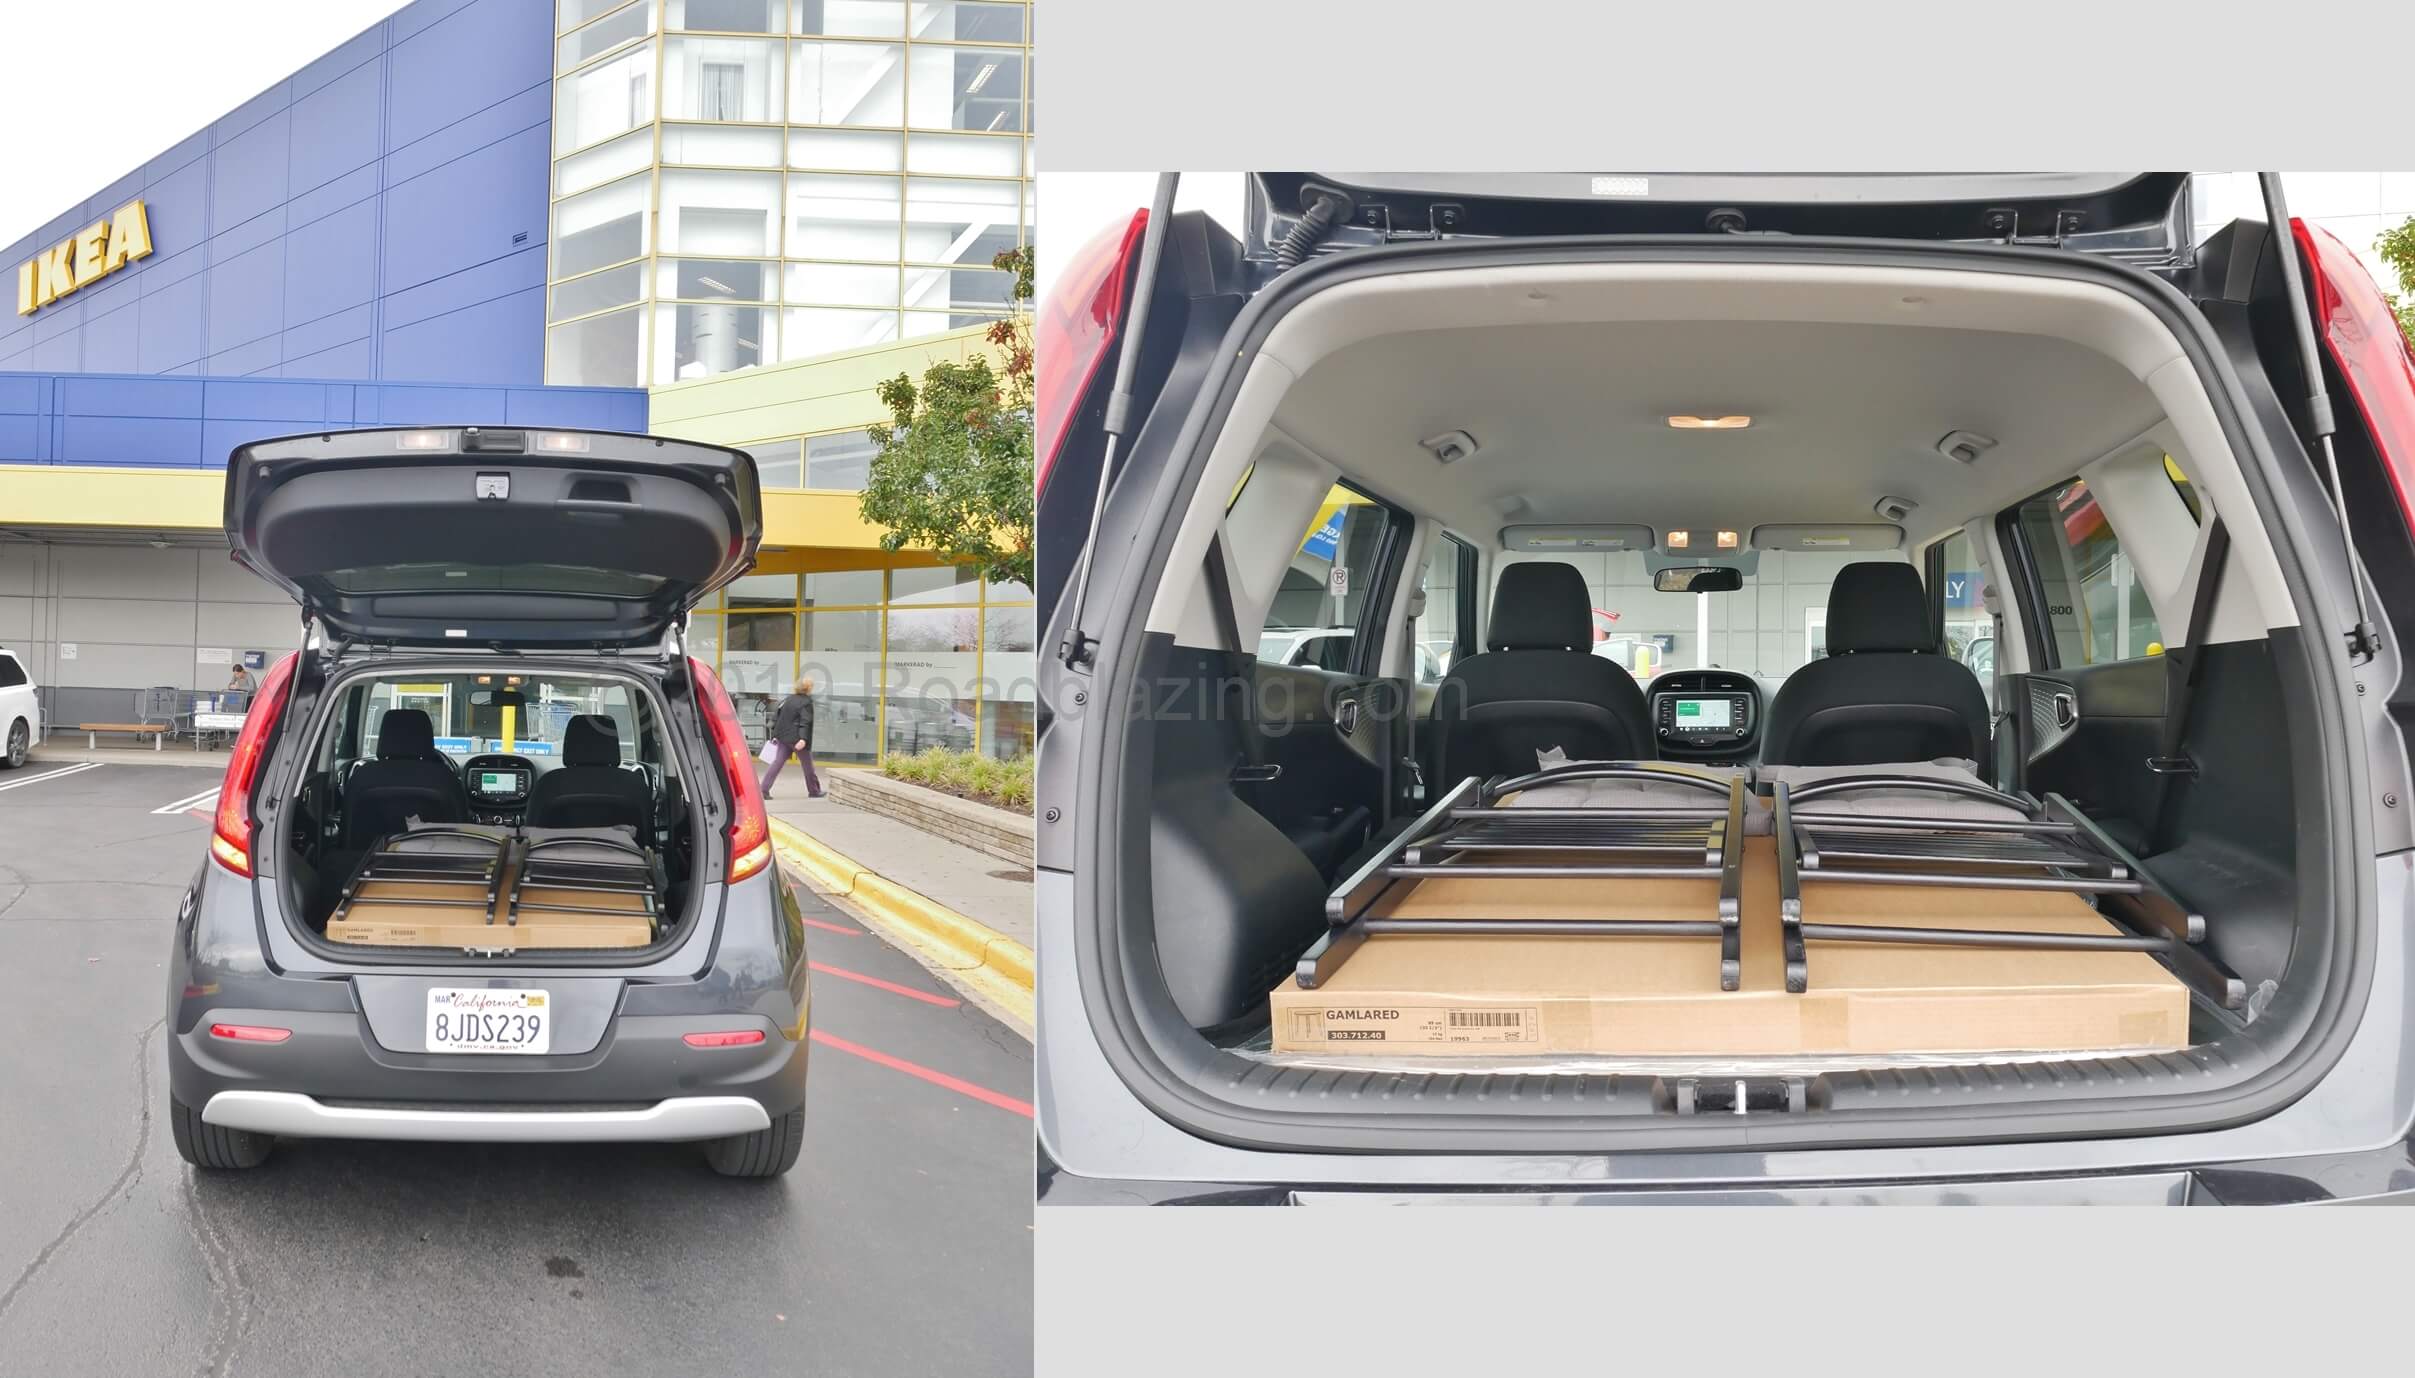 2020 Kia Soul X-Line: Low & flat expanded load floor easily accommodate 3 feet wide and nearly as tall assemble it yourself furnishings.